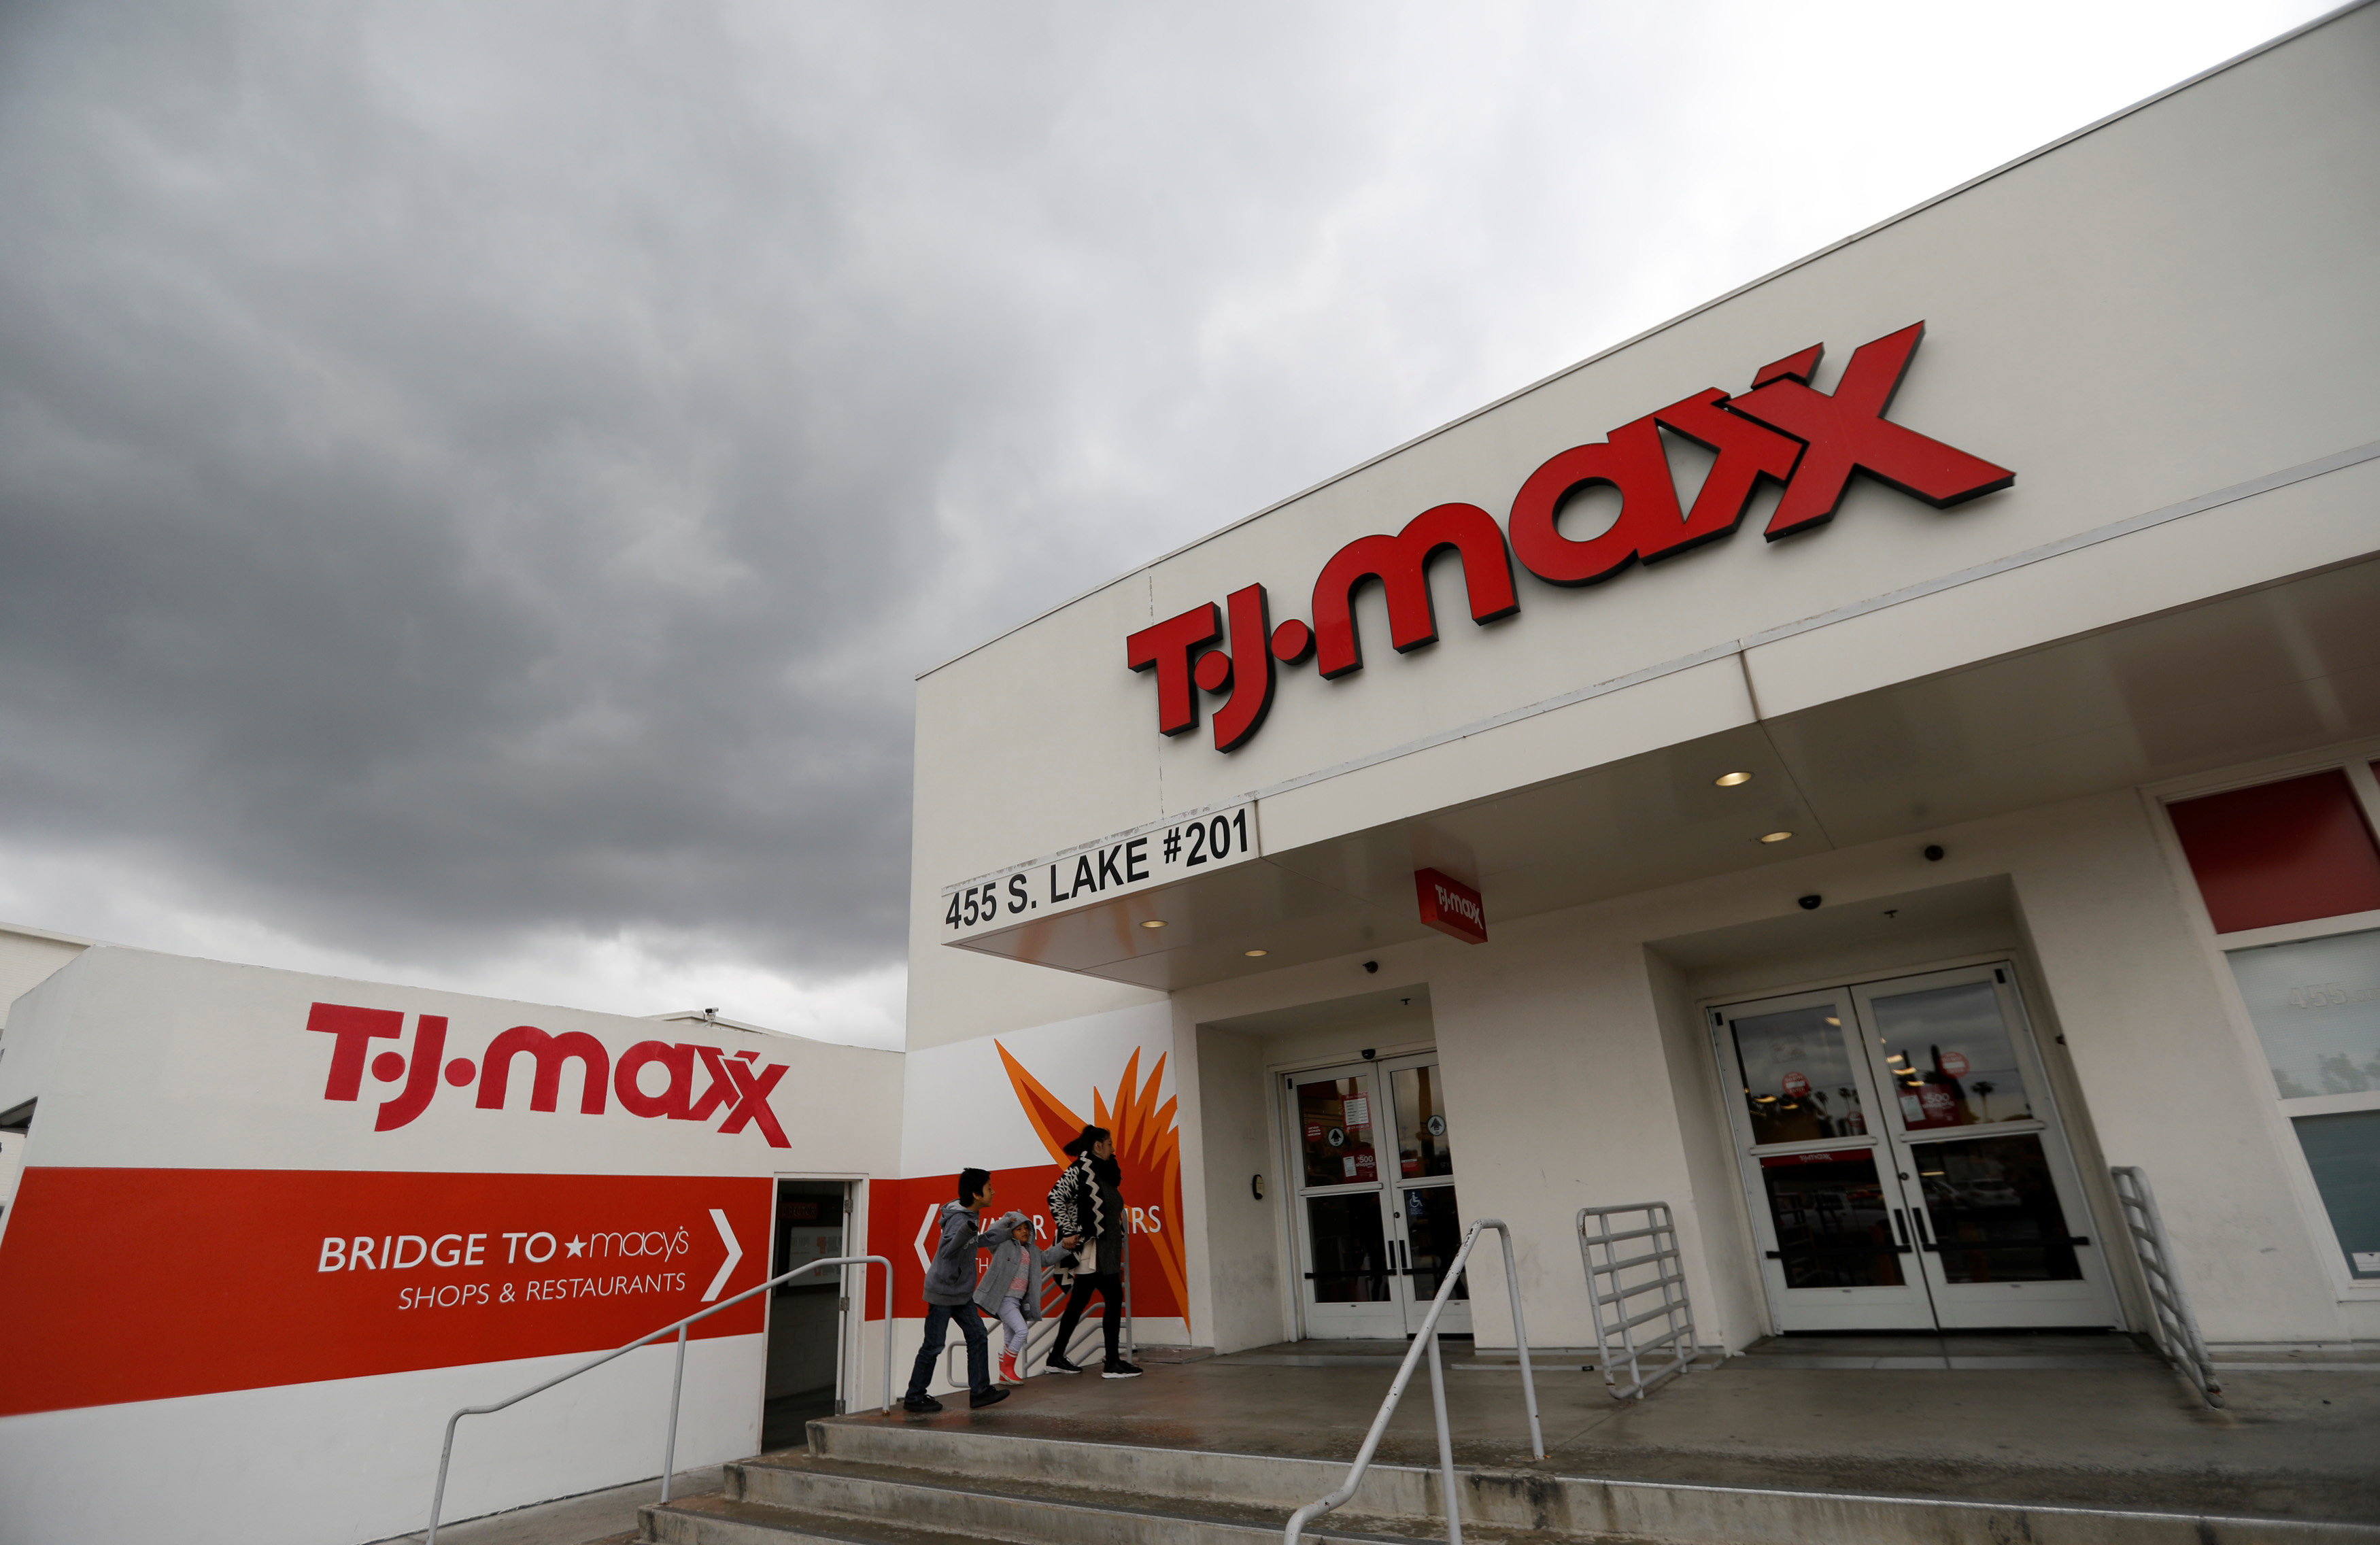 TJ Maxx operator earnings lifted by U.S. reopening, Europe sales drag